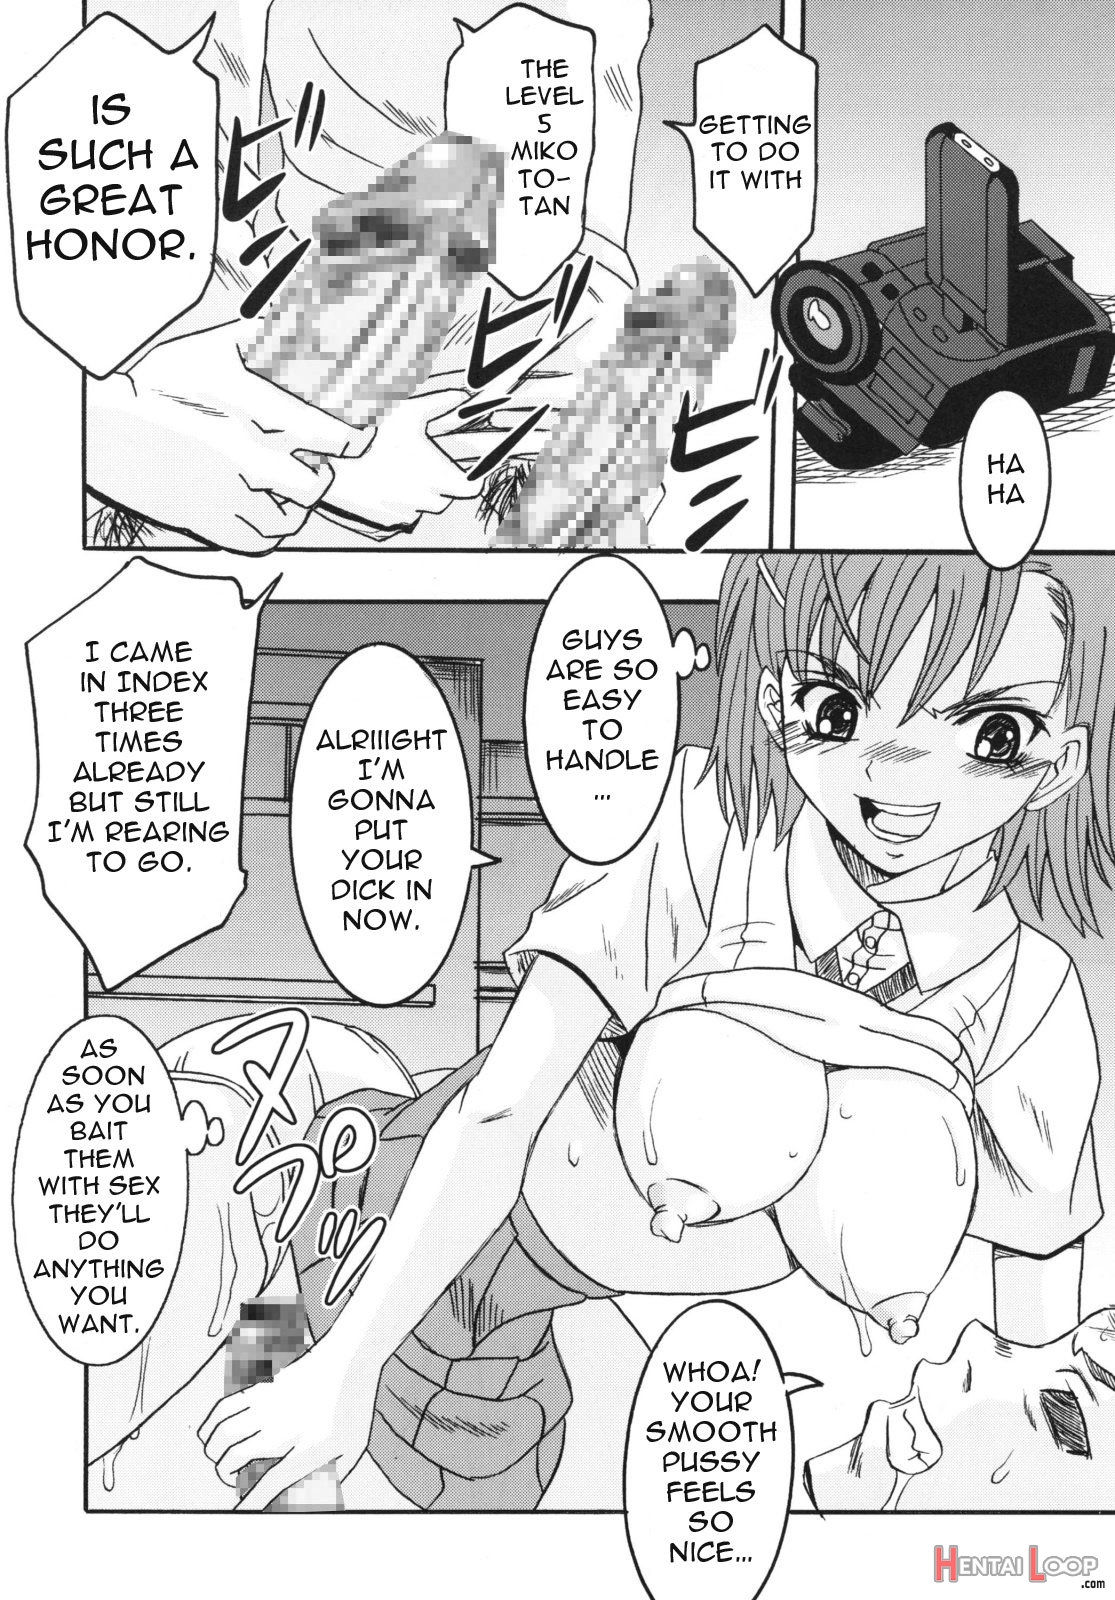 A Certain Magical Lewd Index #2 page 14